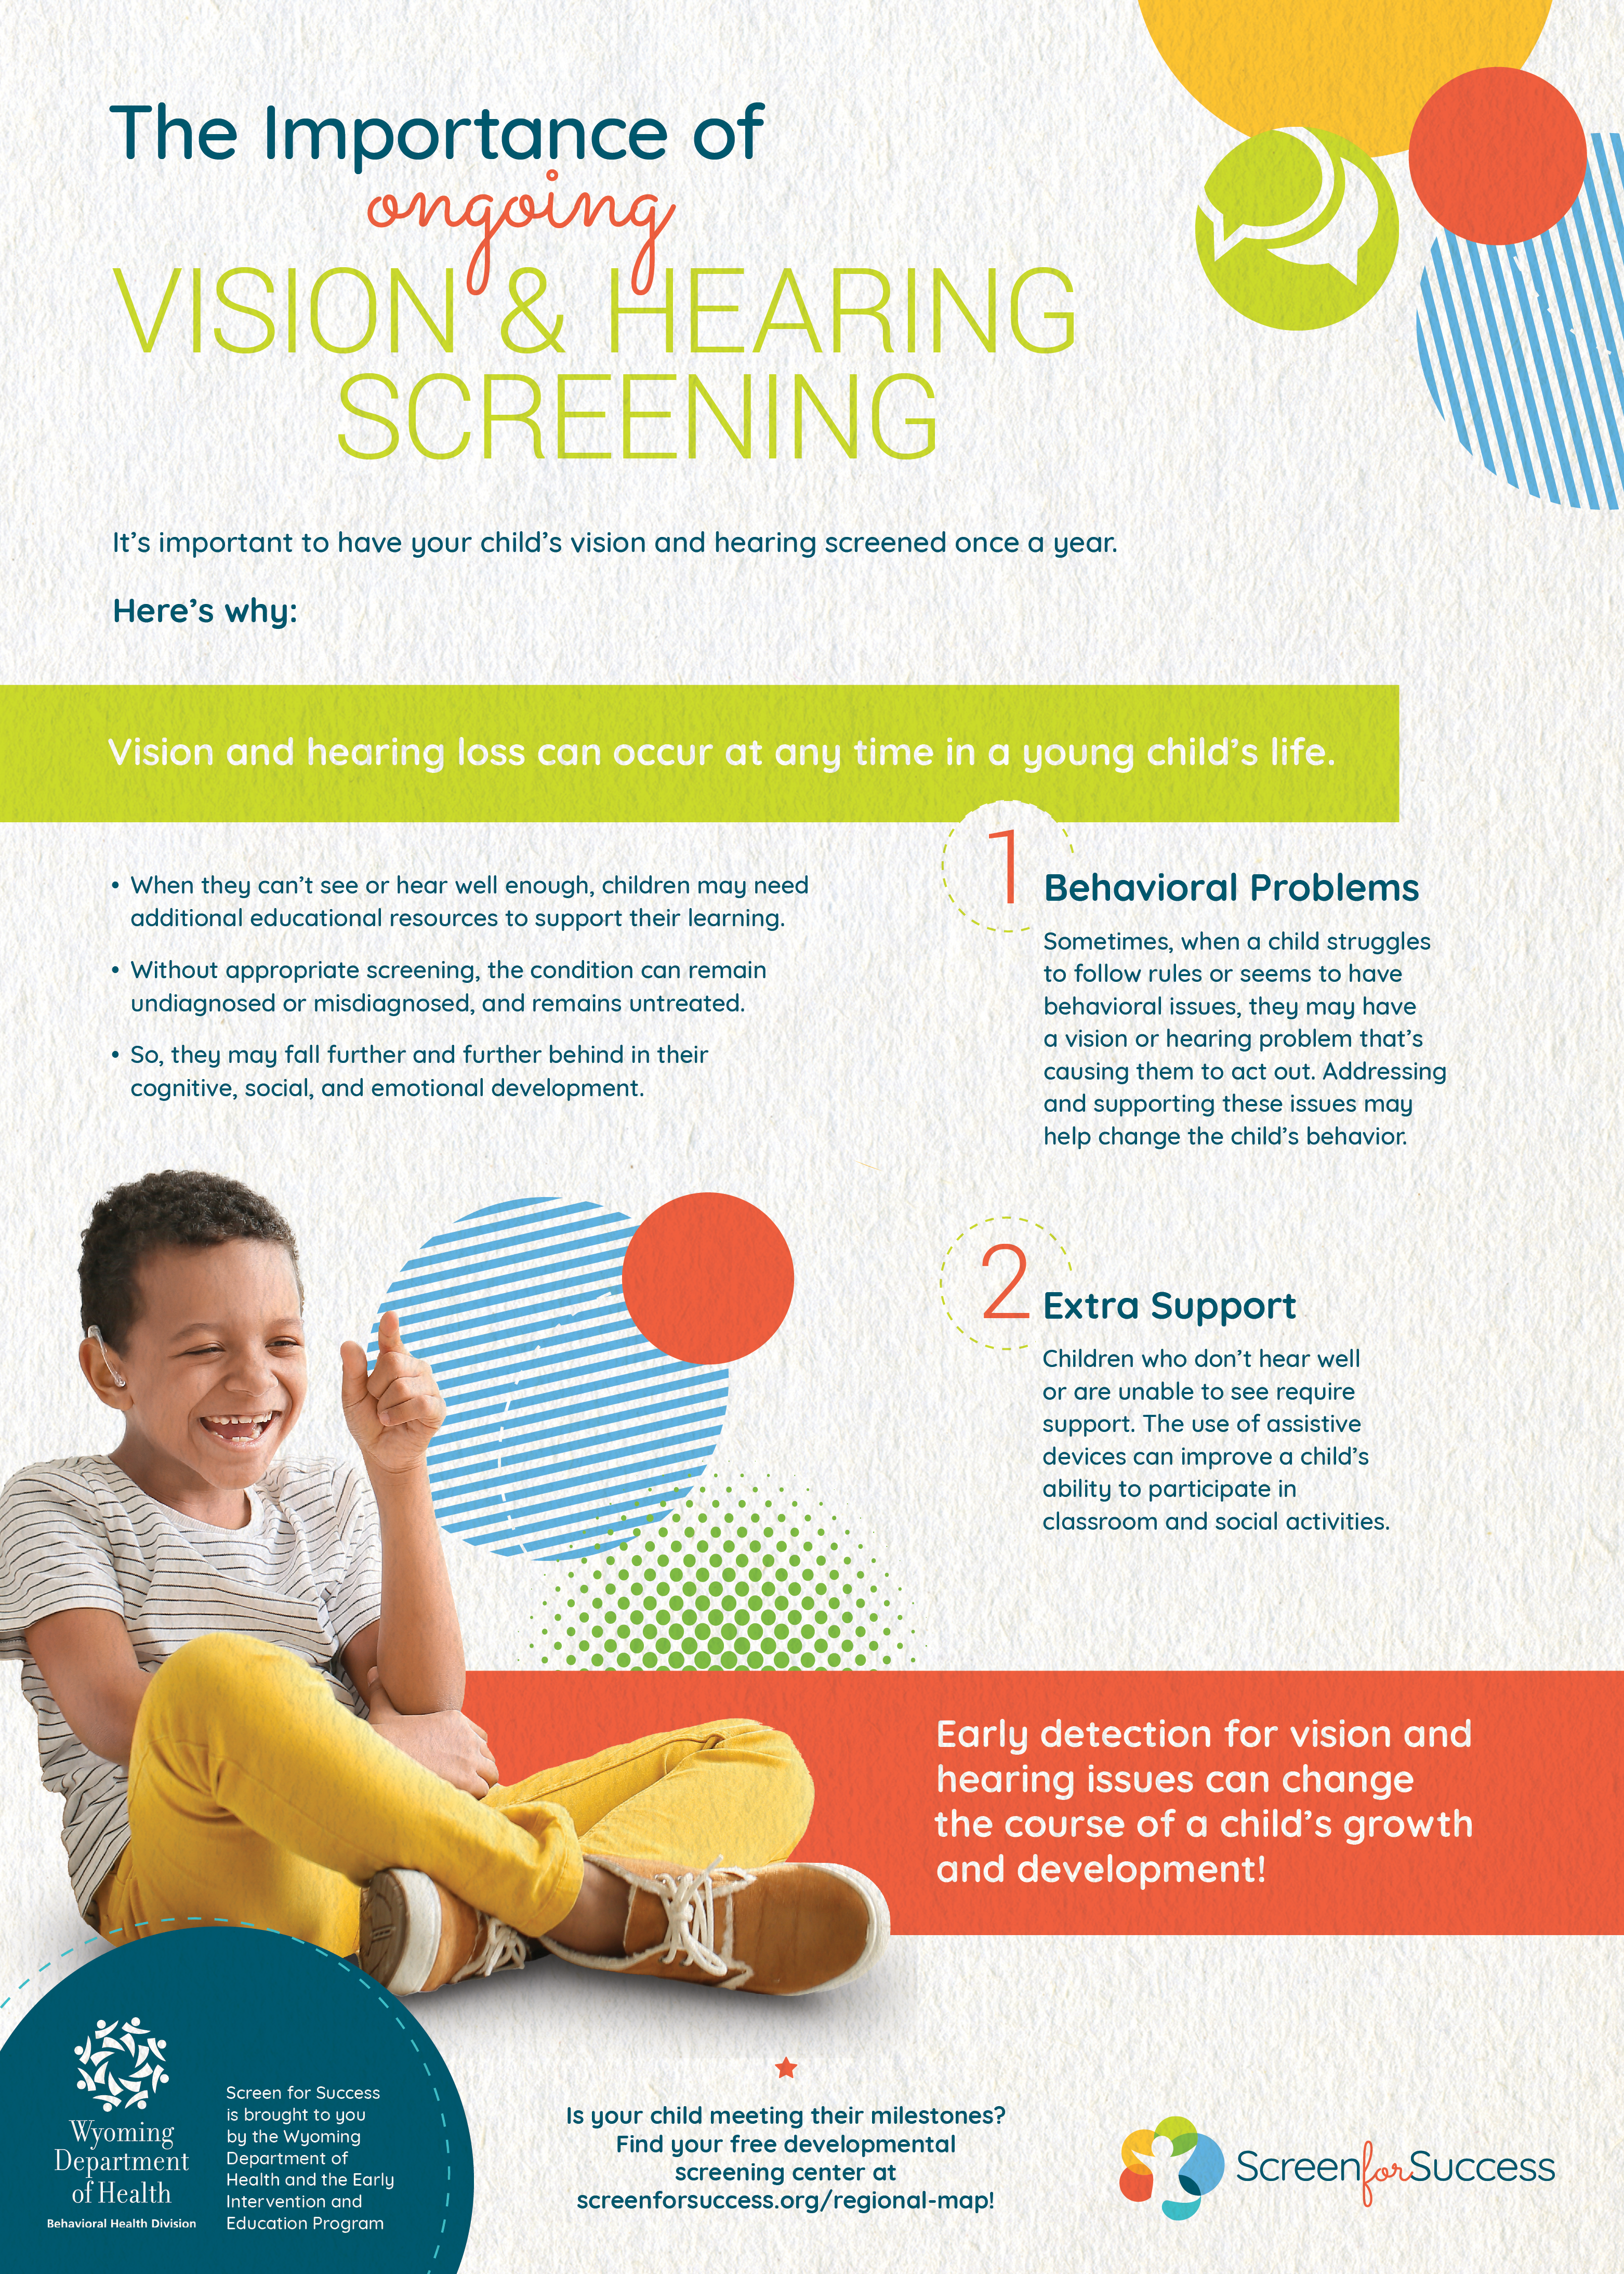 The Importance of Vision & Hearing Screening